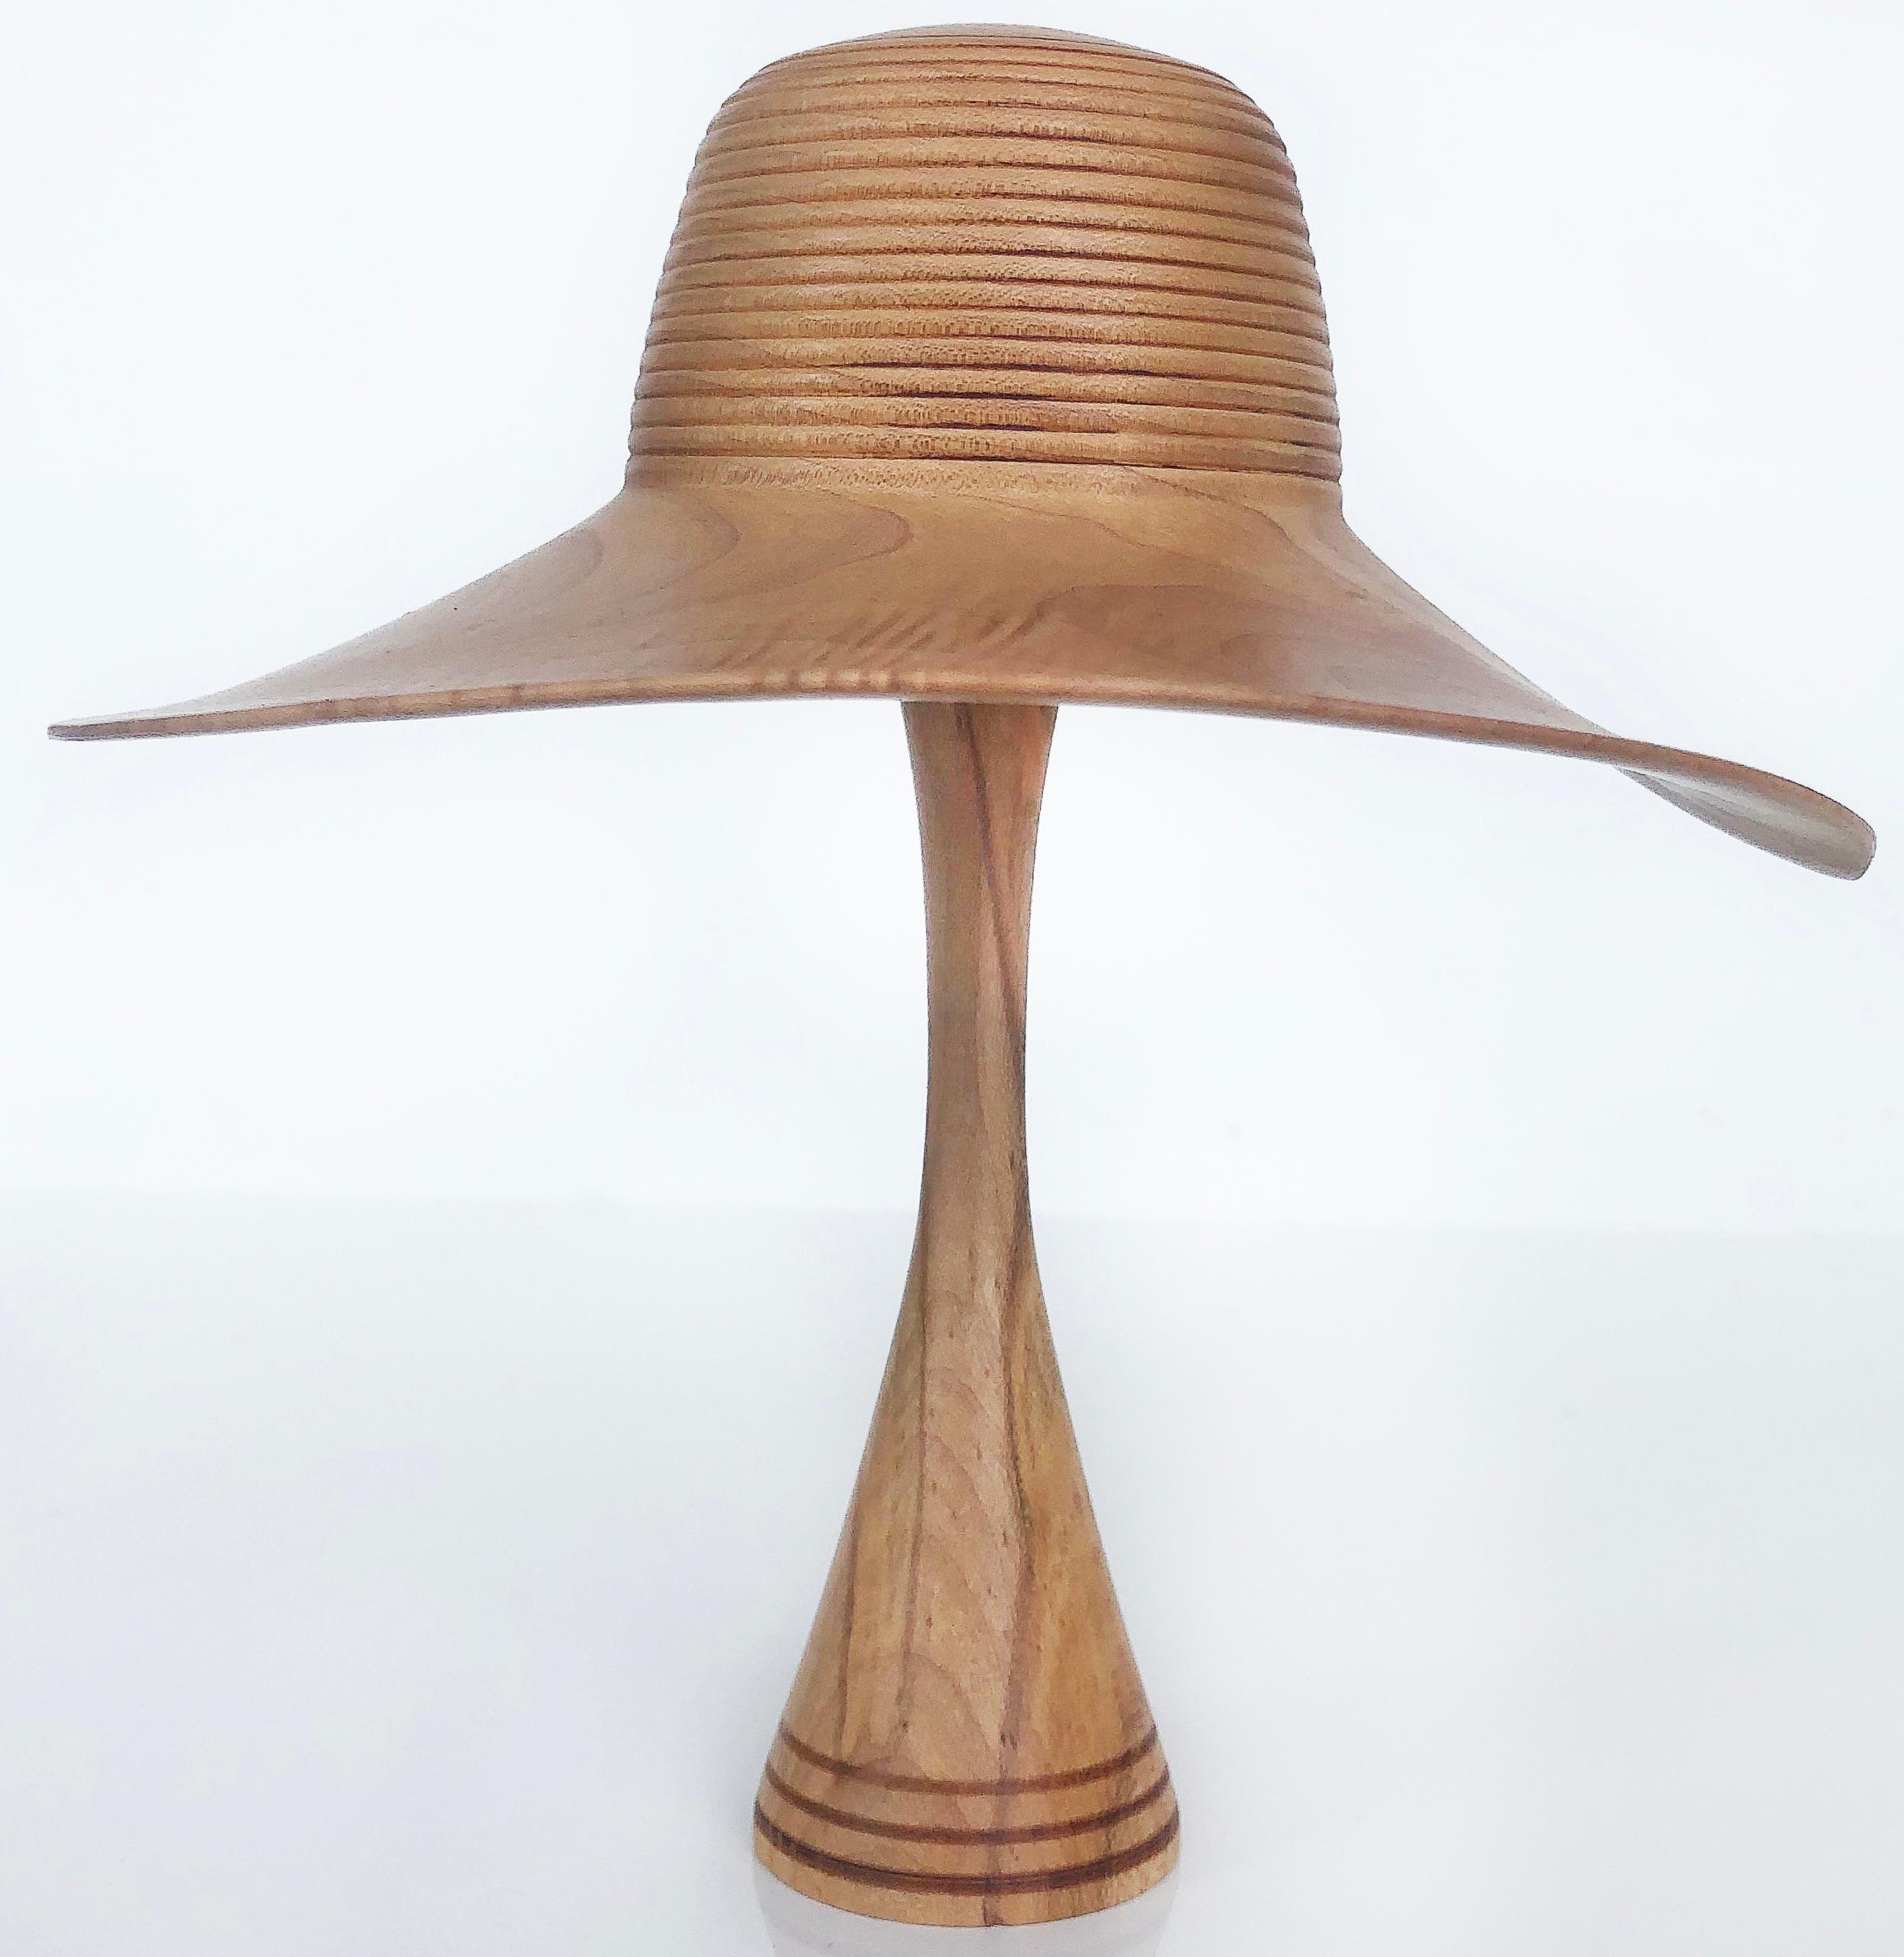  Johannes Michelsen Turned Pair of Wood Hats on Stands, Signed and Dated 2